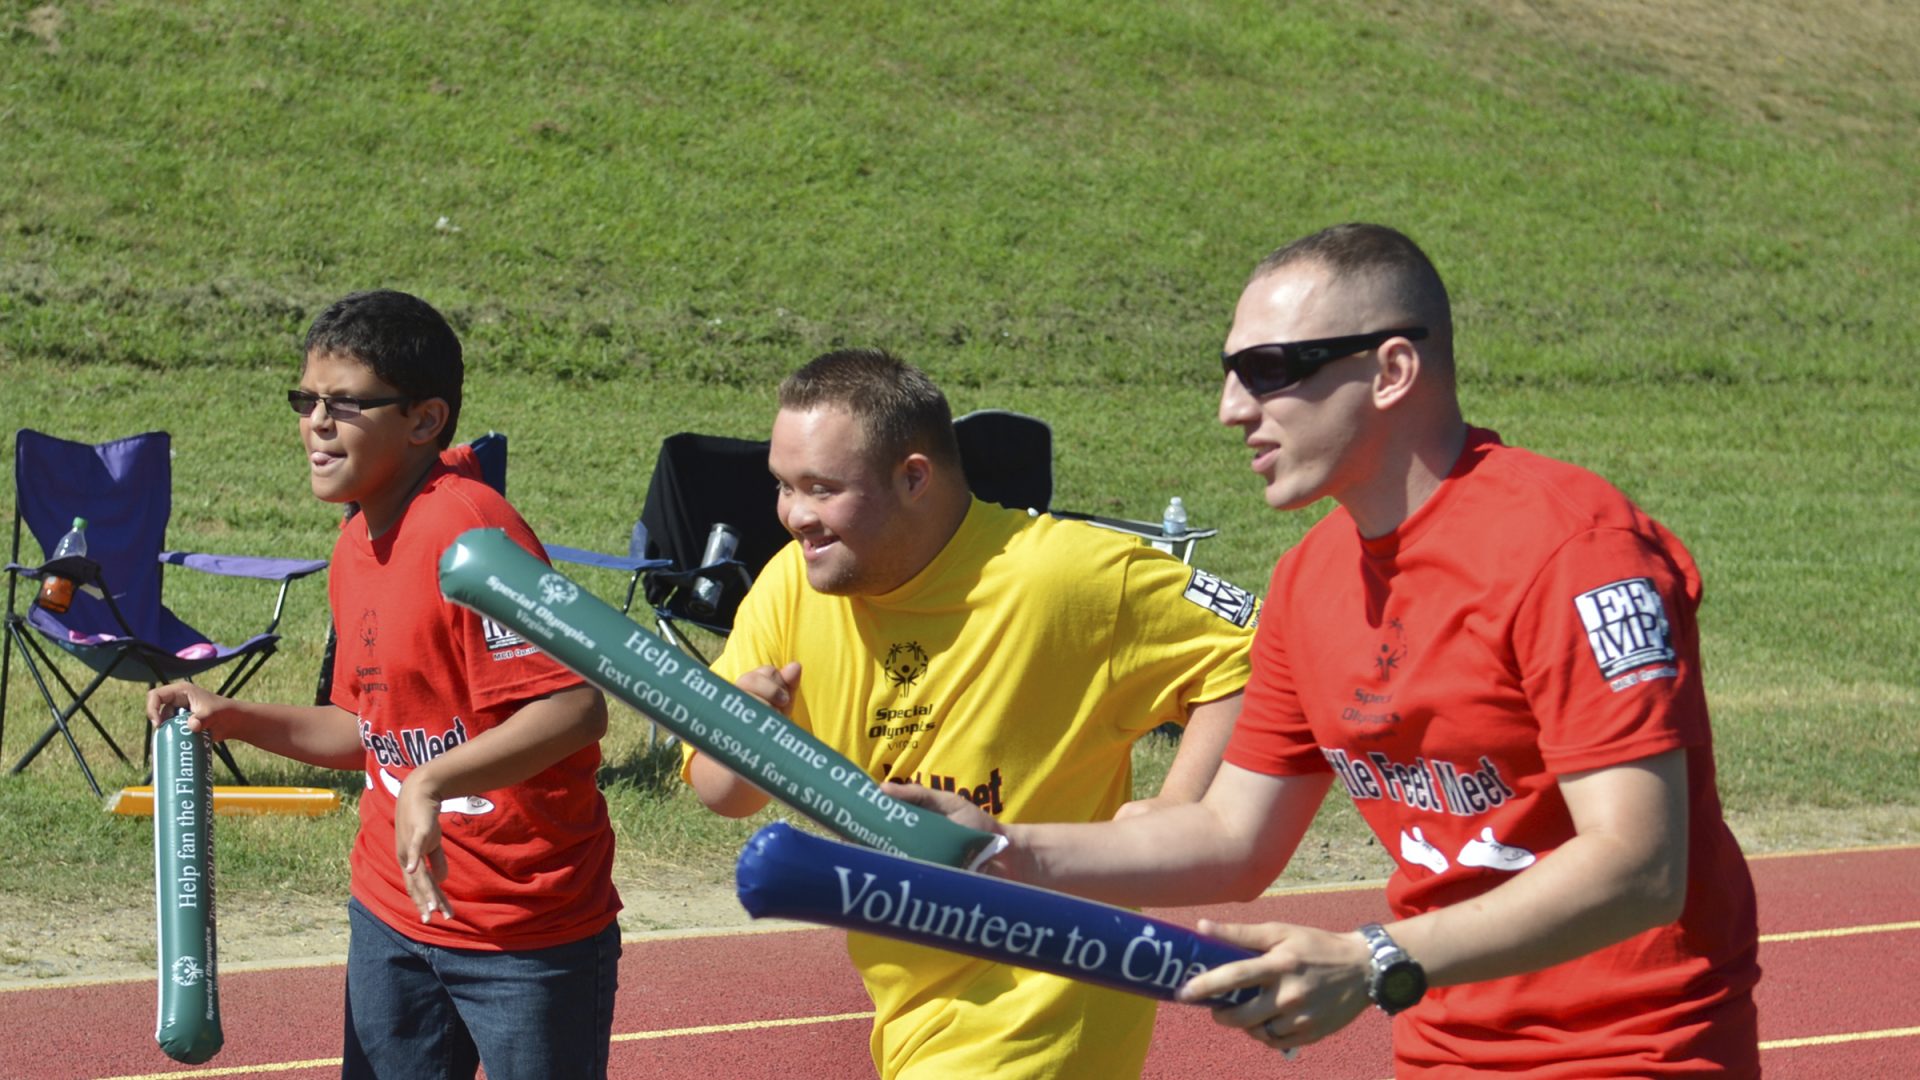 Special Olympics participant runs during a track and field event